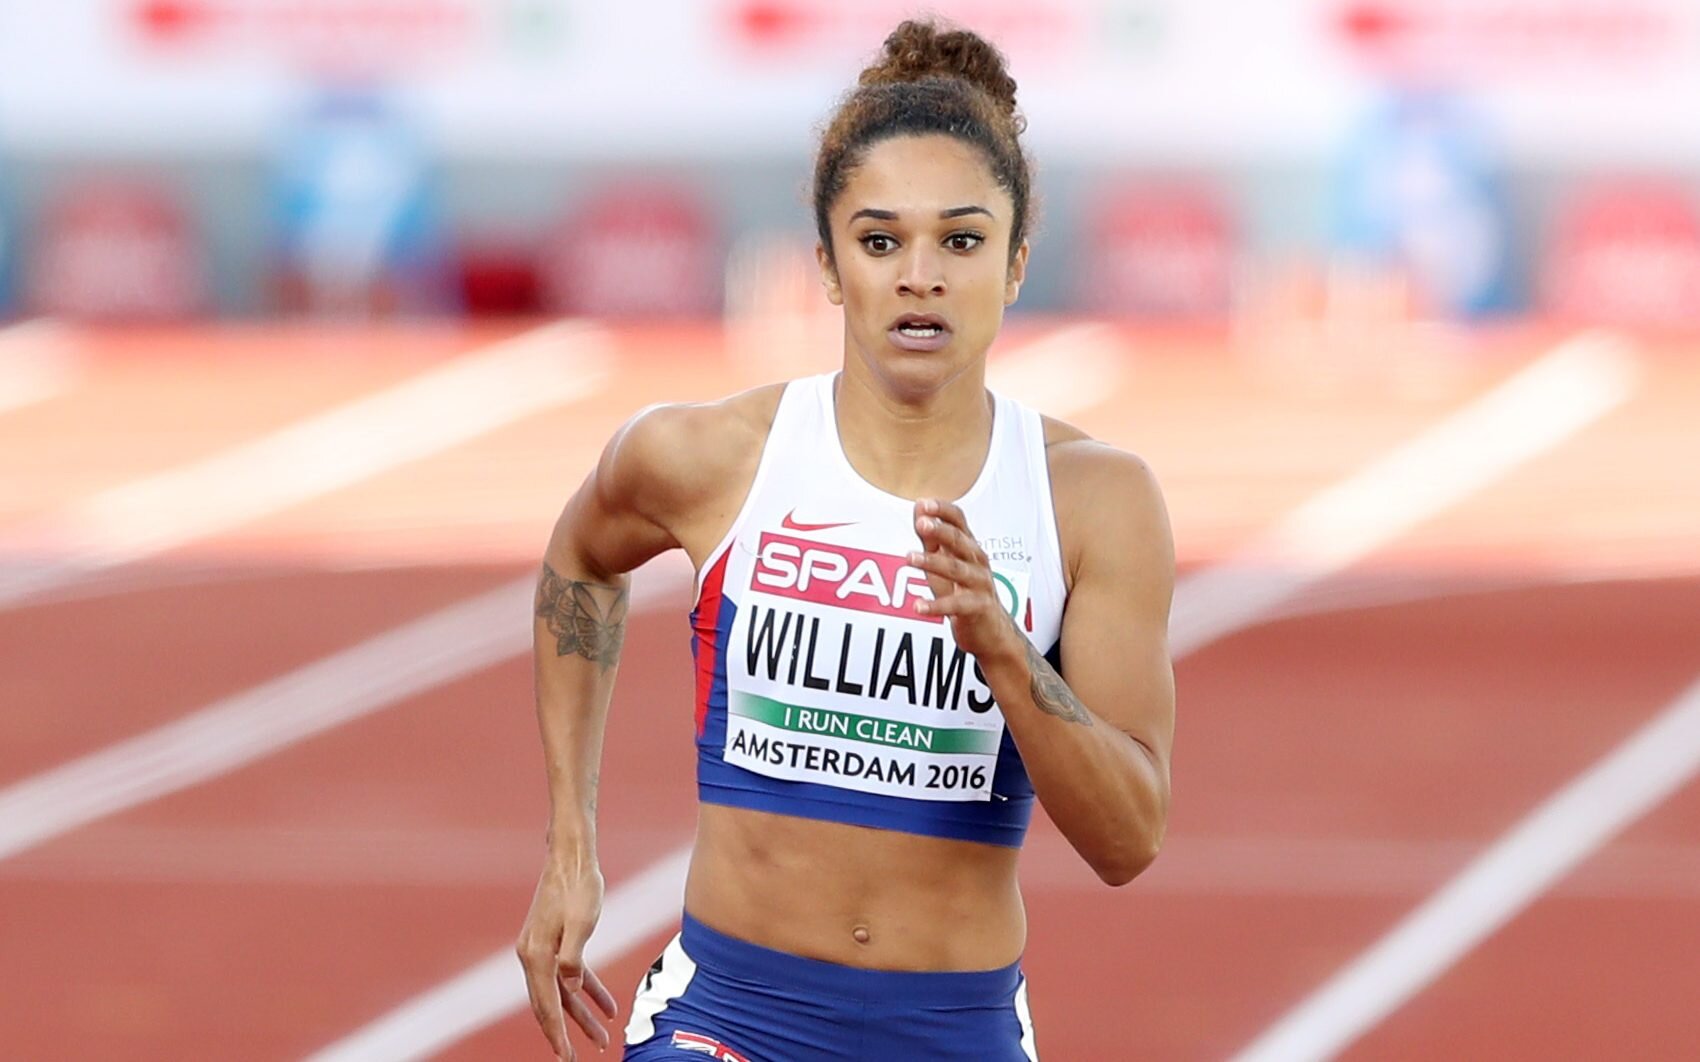 A training session with team GB olympian athlete Jodie Williams (donate £250)